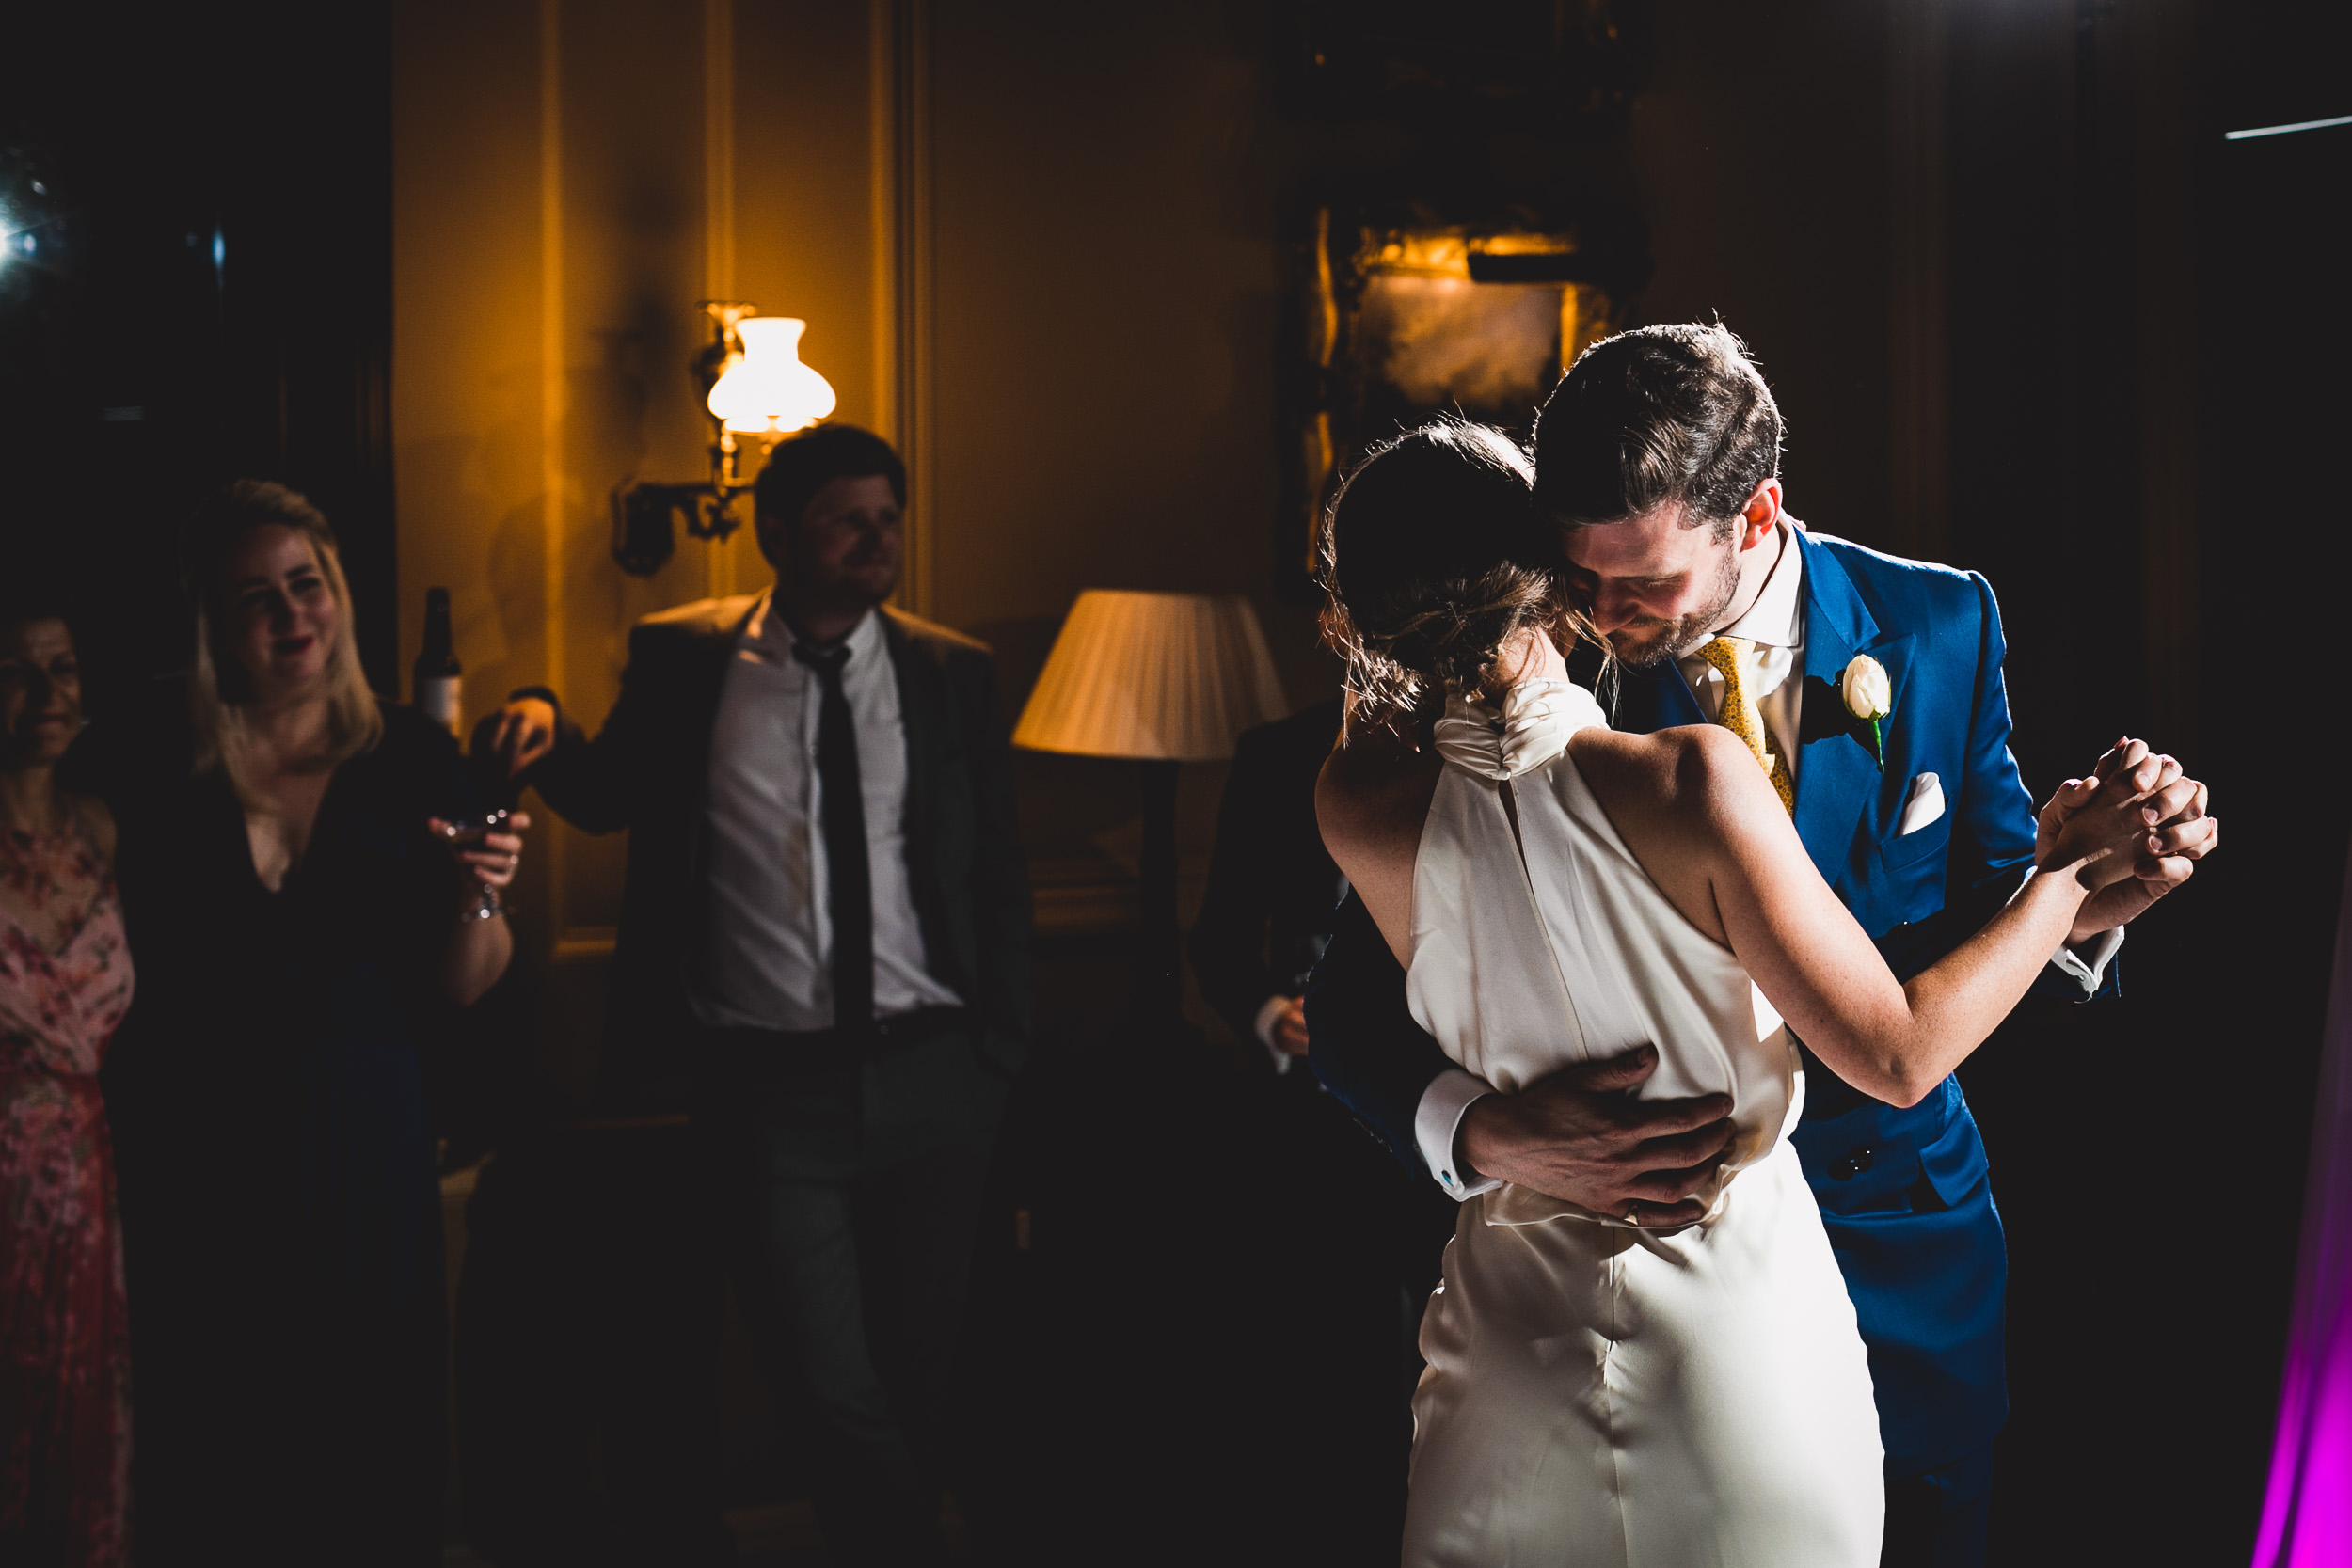 A bride and groom captured in a wedding photo, sharing their first dance.